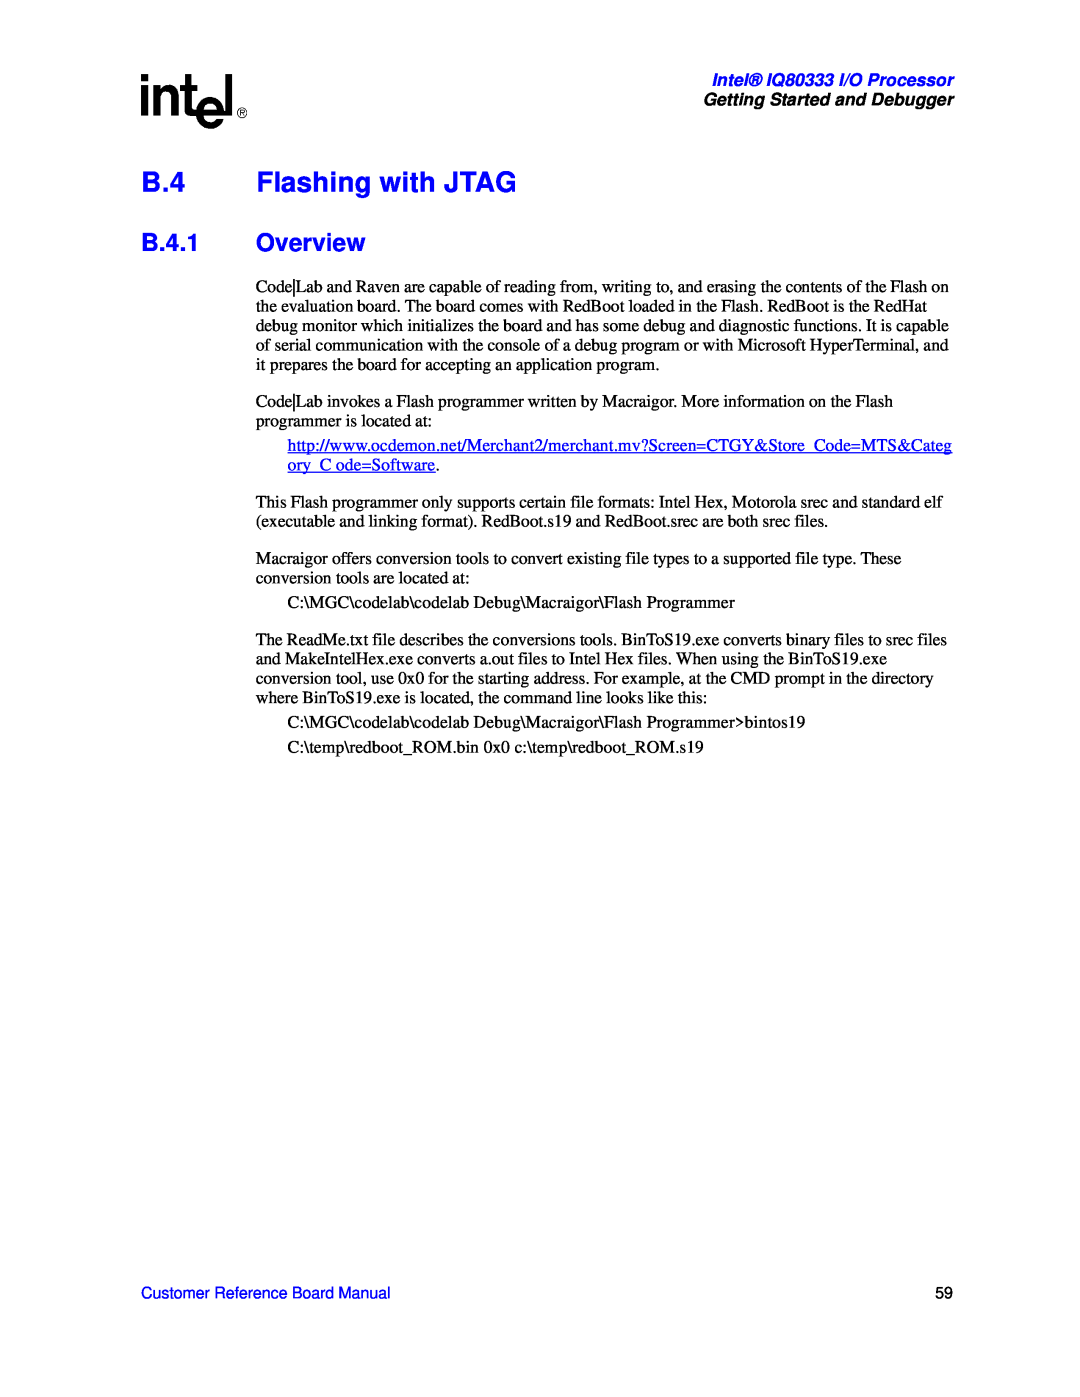 Intel manual B.4 Flashing with JTAG, B.4.1 Overview, Intel IQ80333 I/O Processor, Getting Started and Debugger 